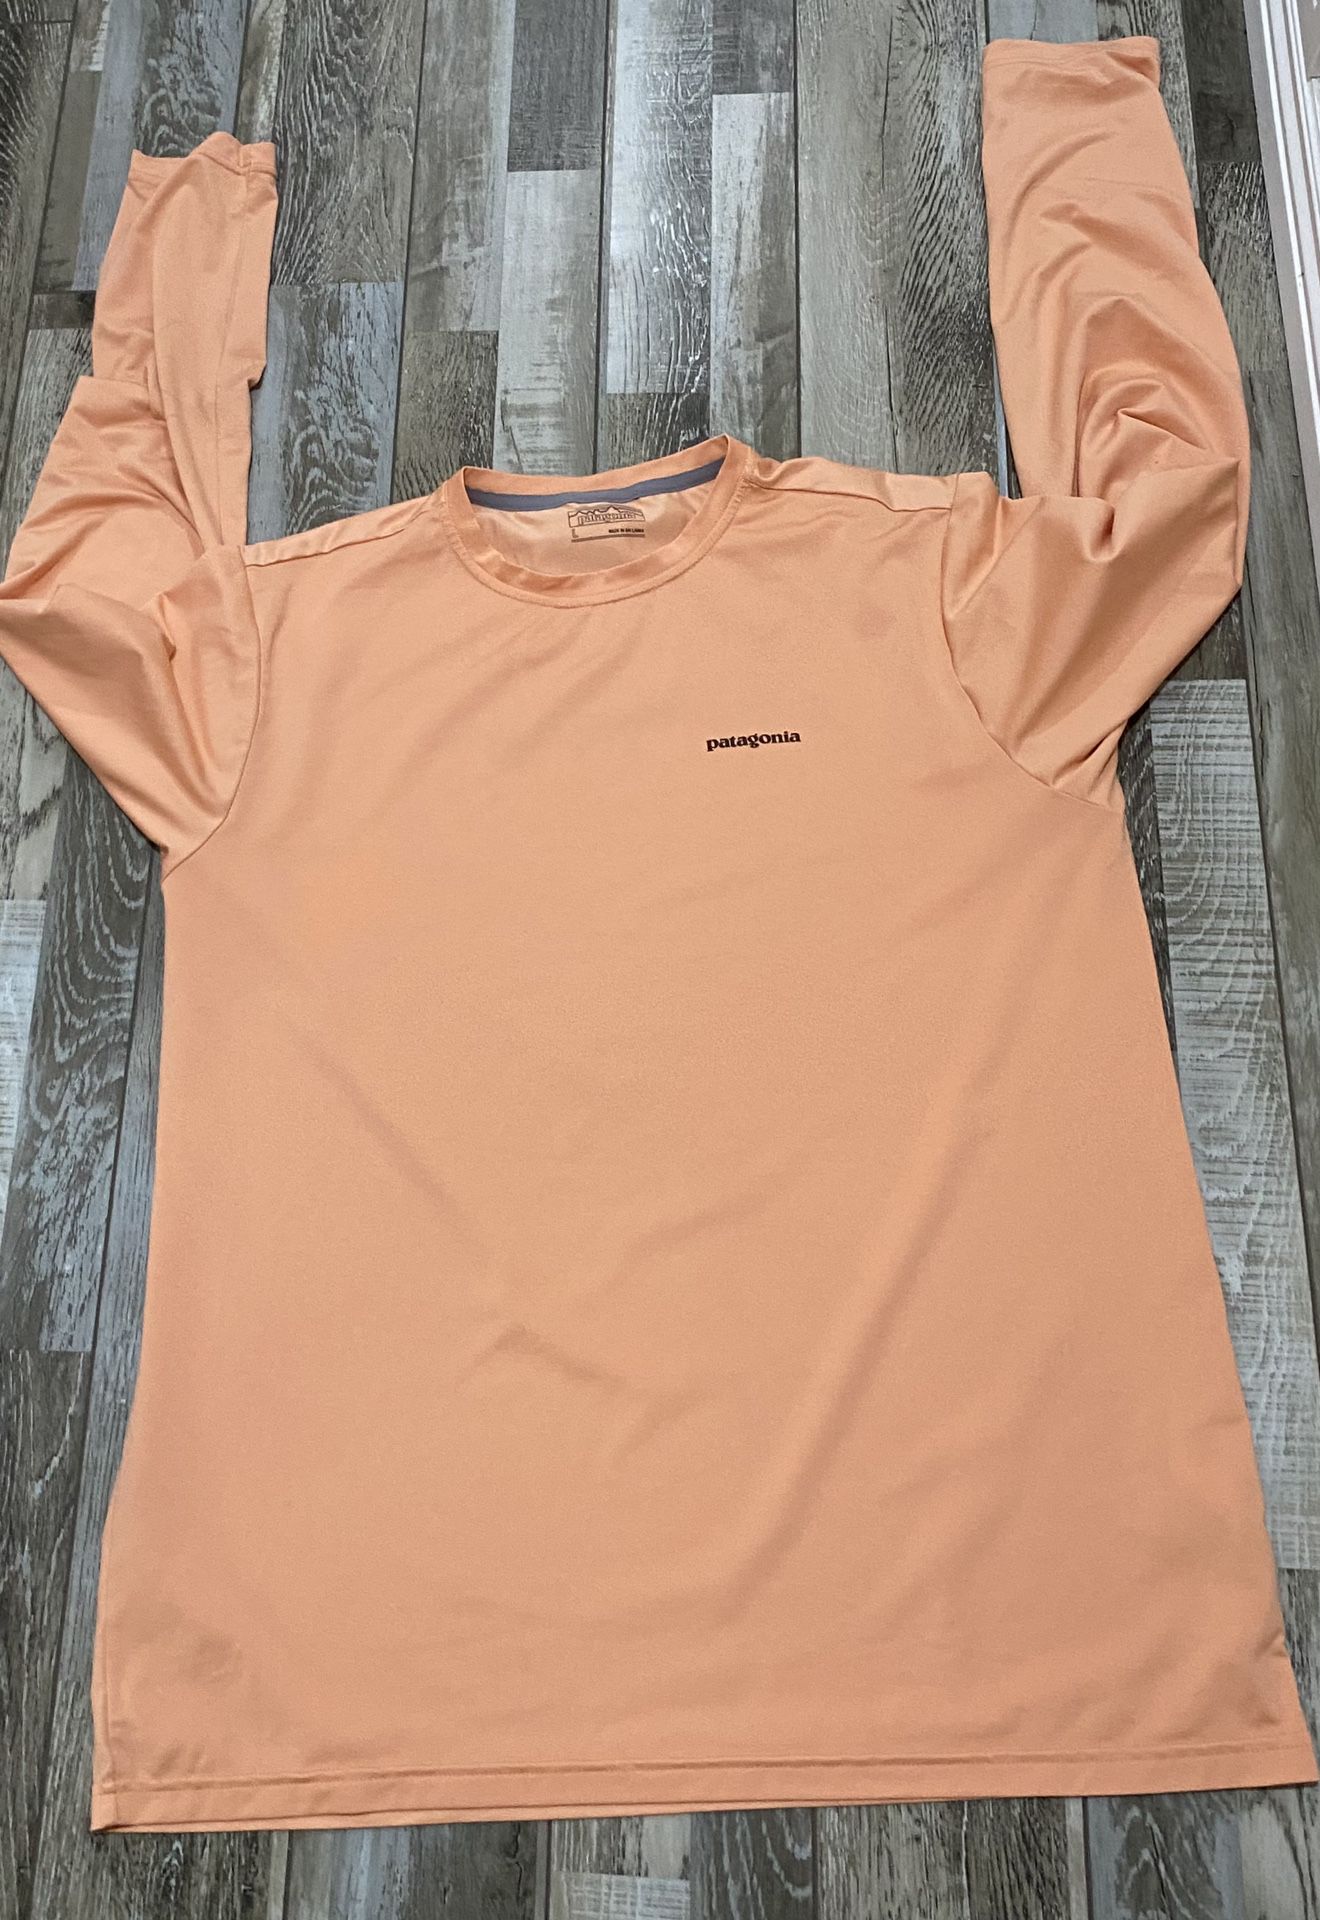 PATAGONIA MEN'S LONG-SLEEVED CAPILENE(R) COOL DAILY FISH GRAPHIC SHIRT SKETCHED FITZ ROY TARPON: LIGHT PEACH SHERBET Large